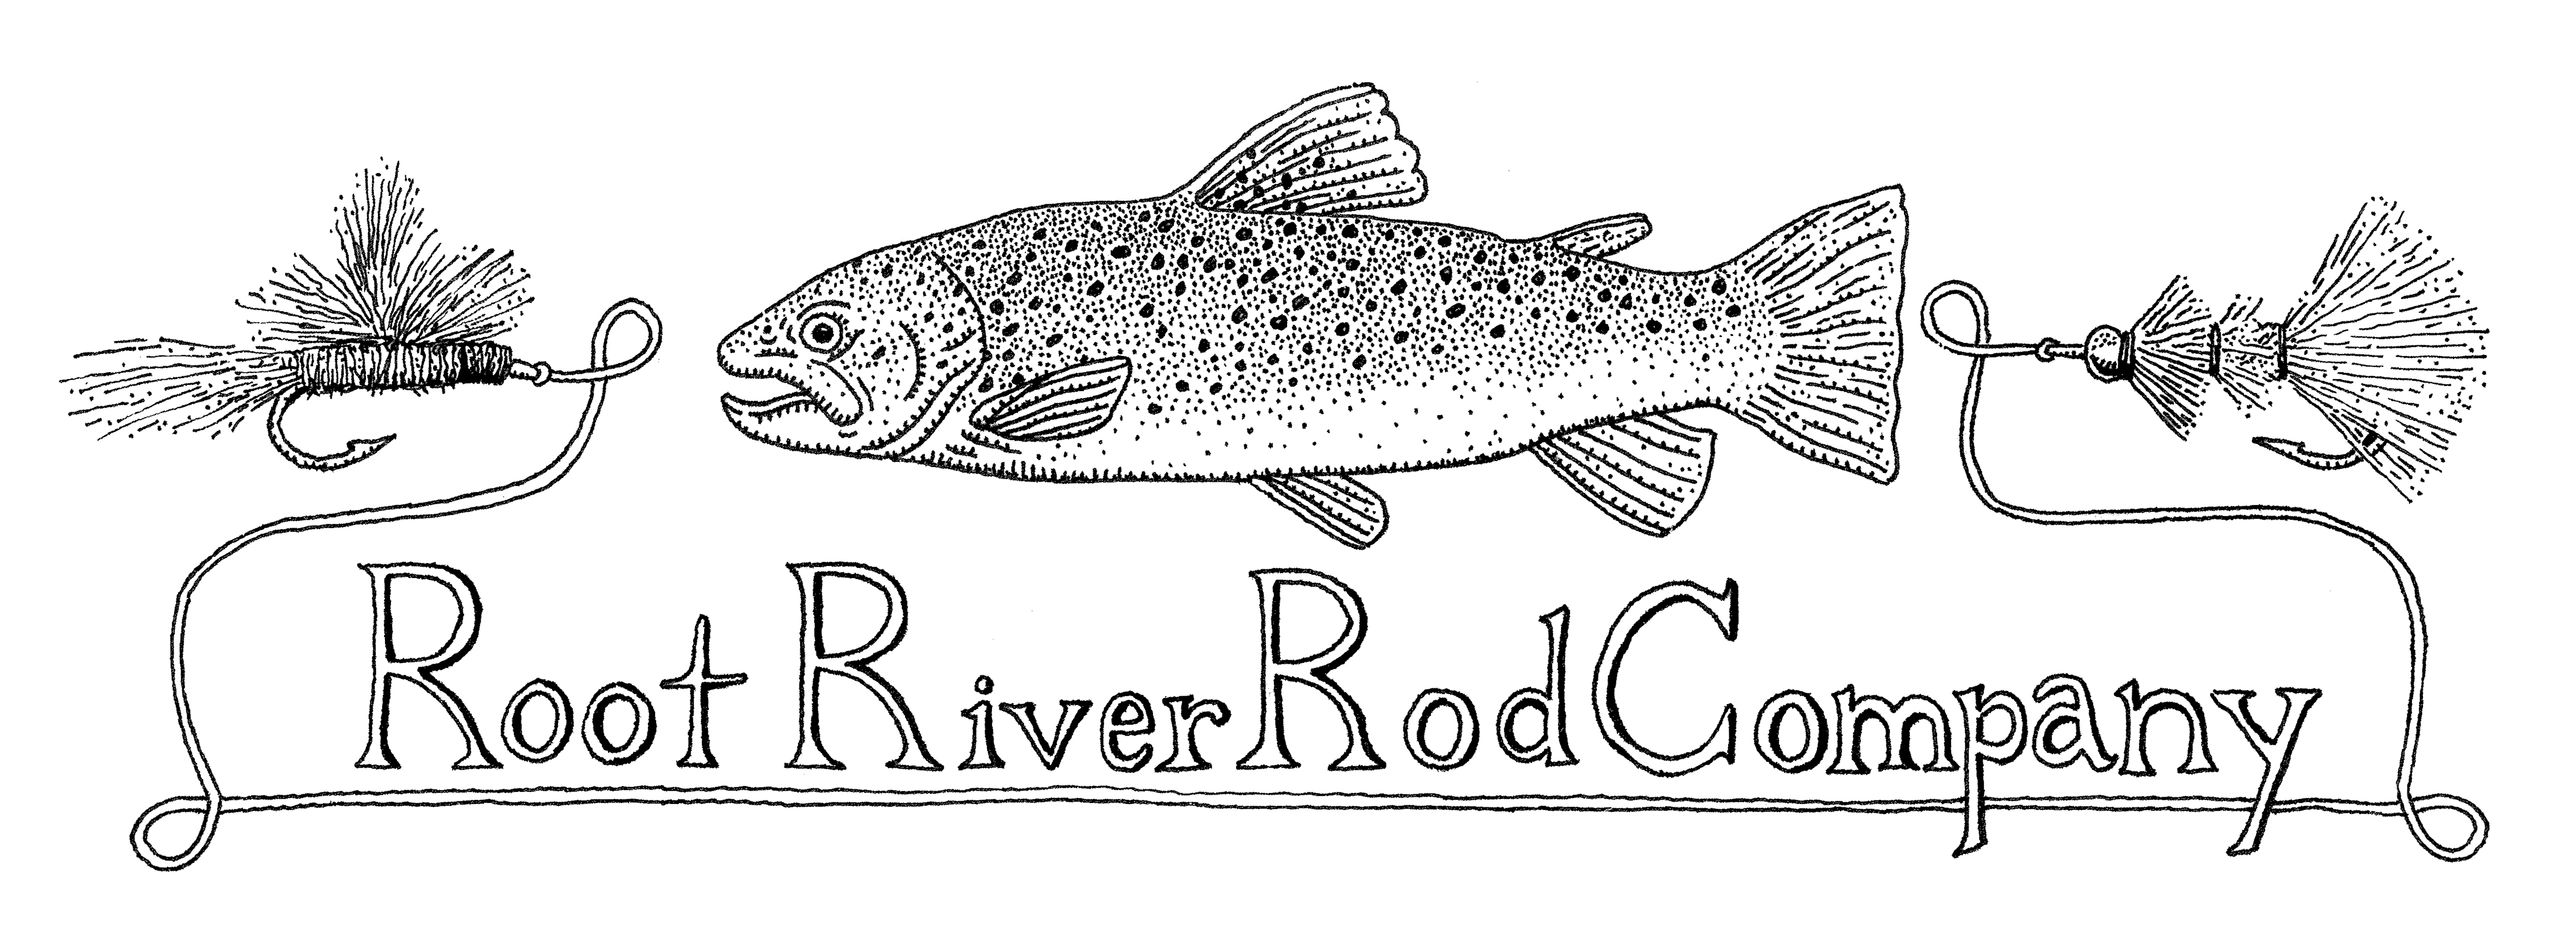 Fly Fishing Bamboo Trout Rods - Root River Rod Co